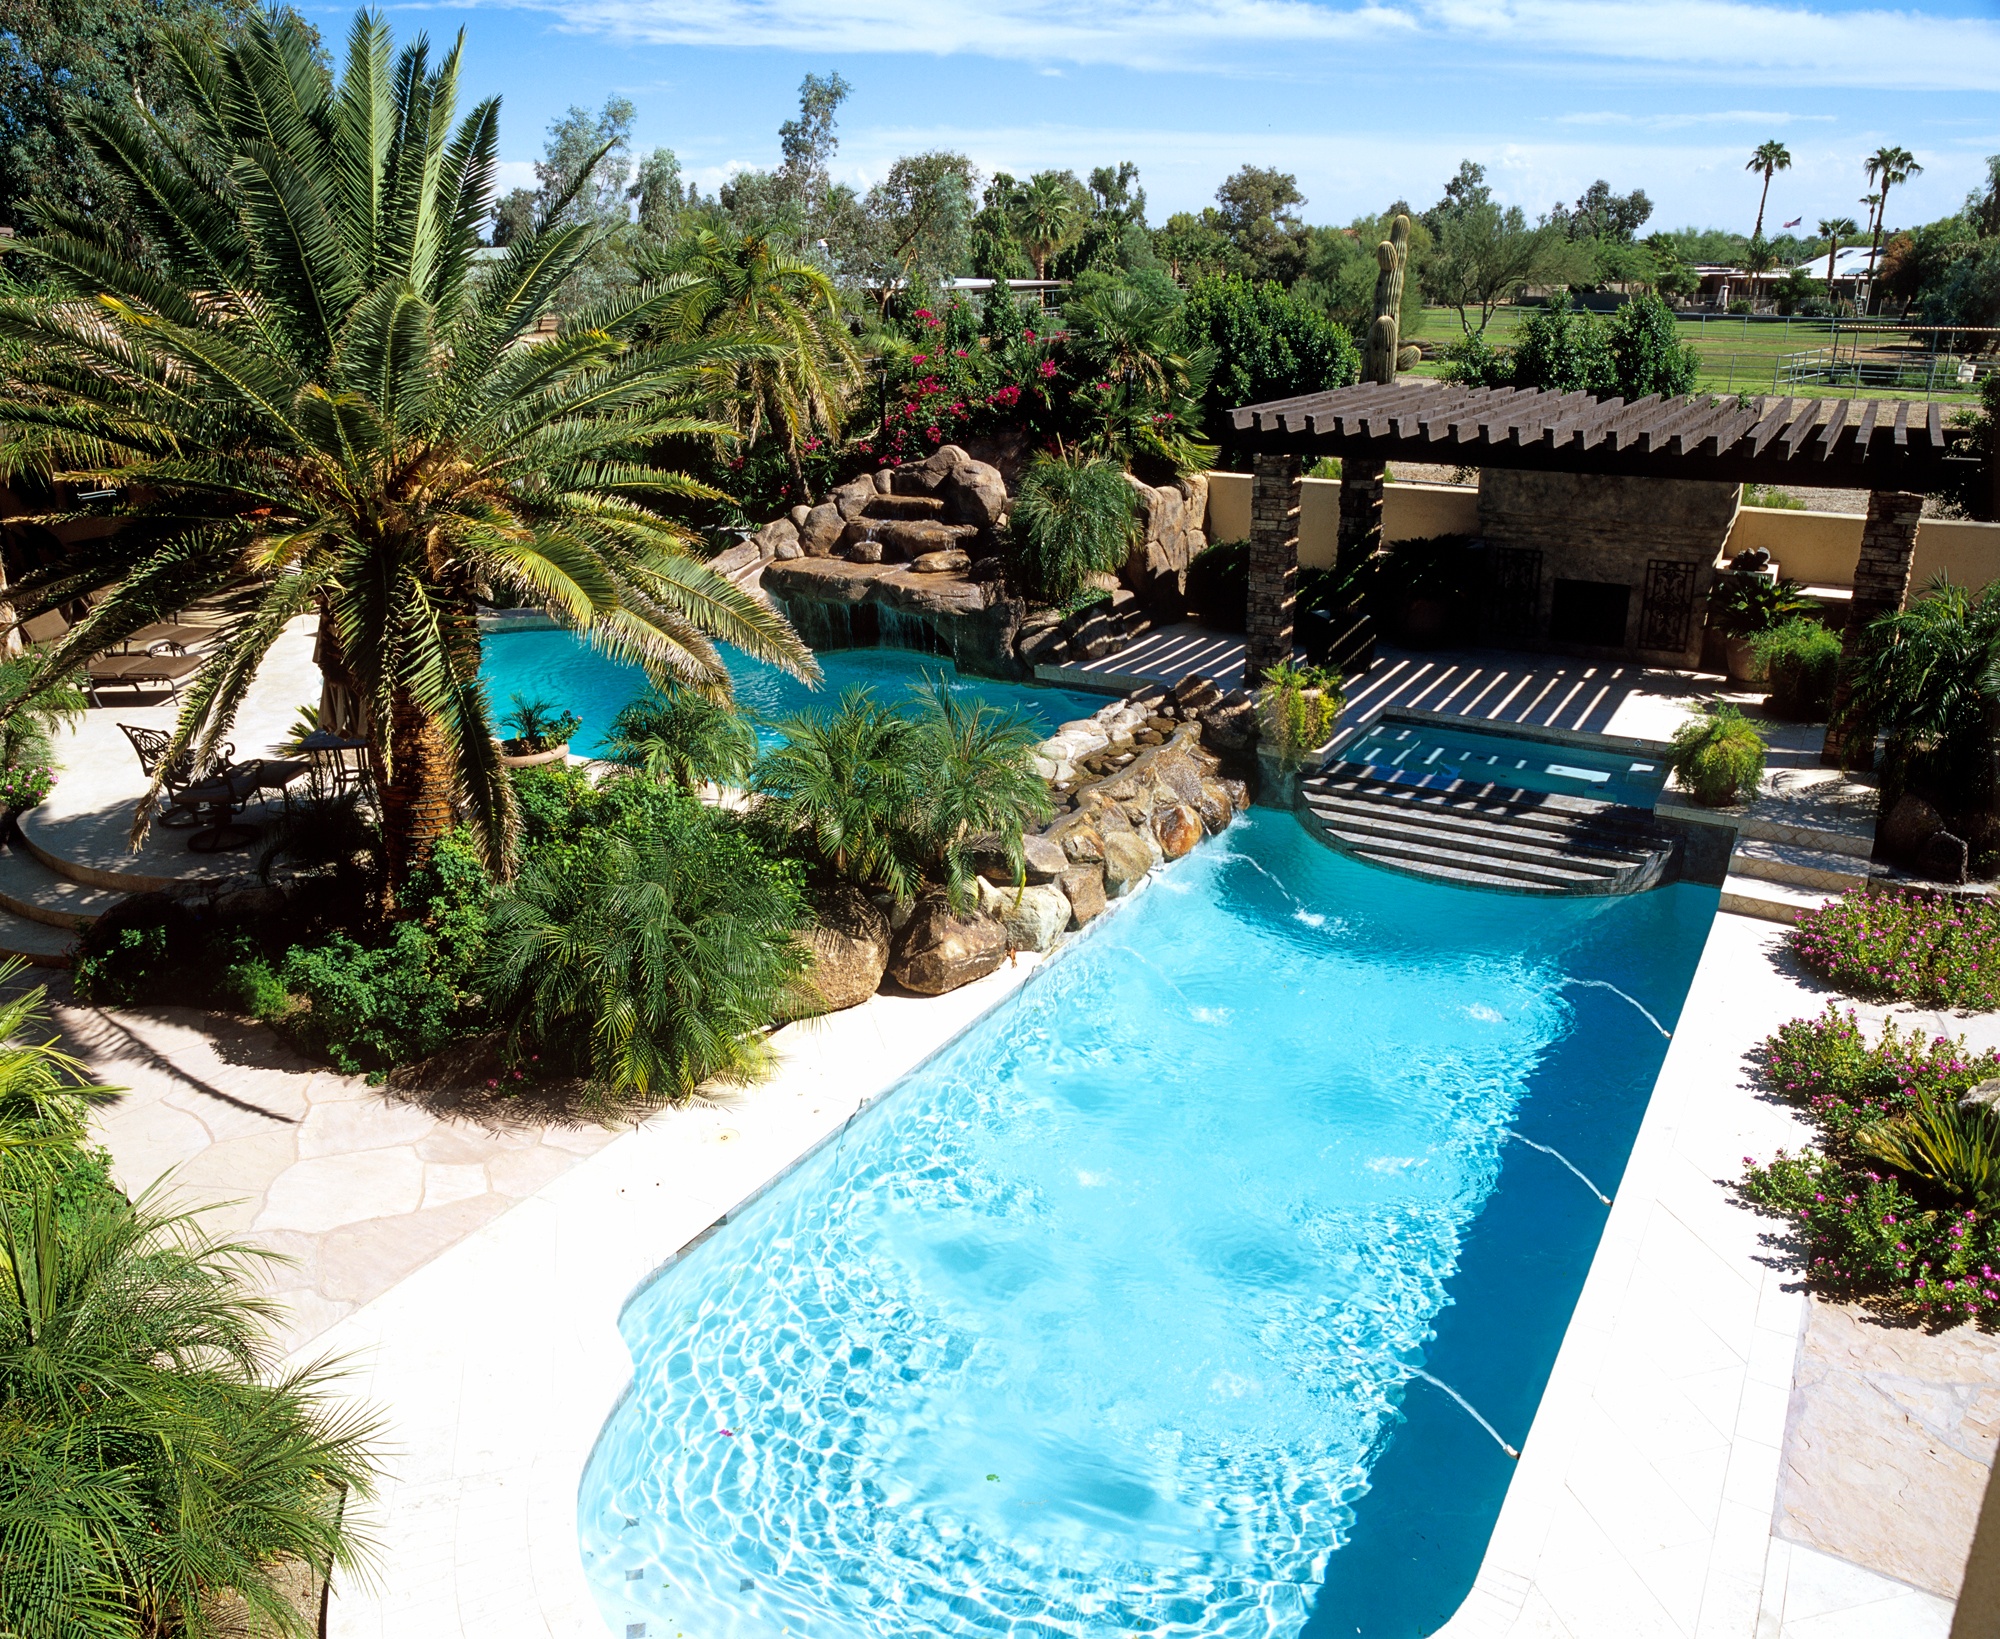 THE COMPLETE CHECKLIST FOR BUYING A POOL IN SCOTTSDALE